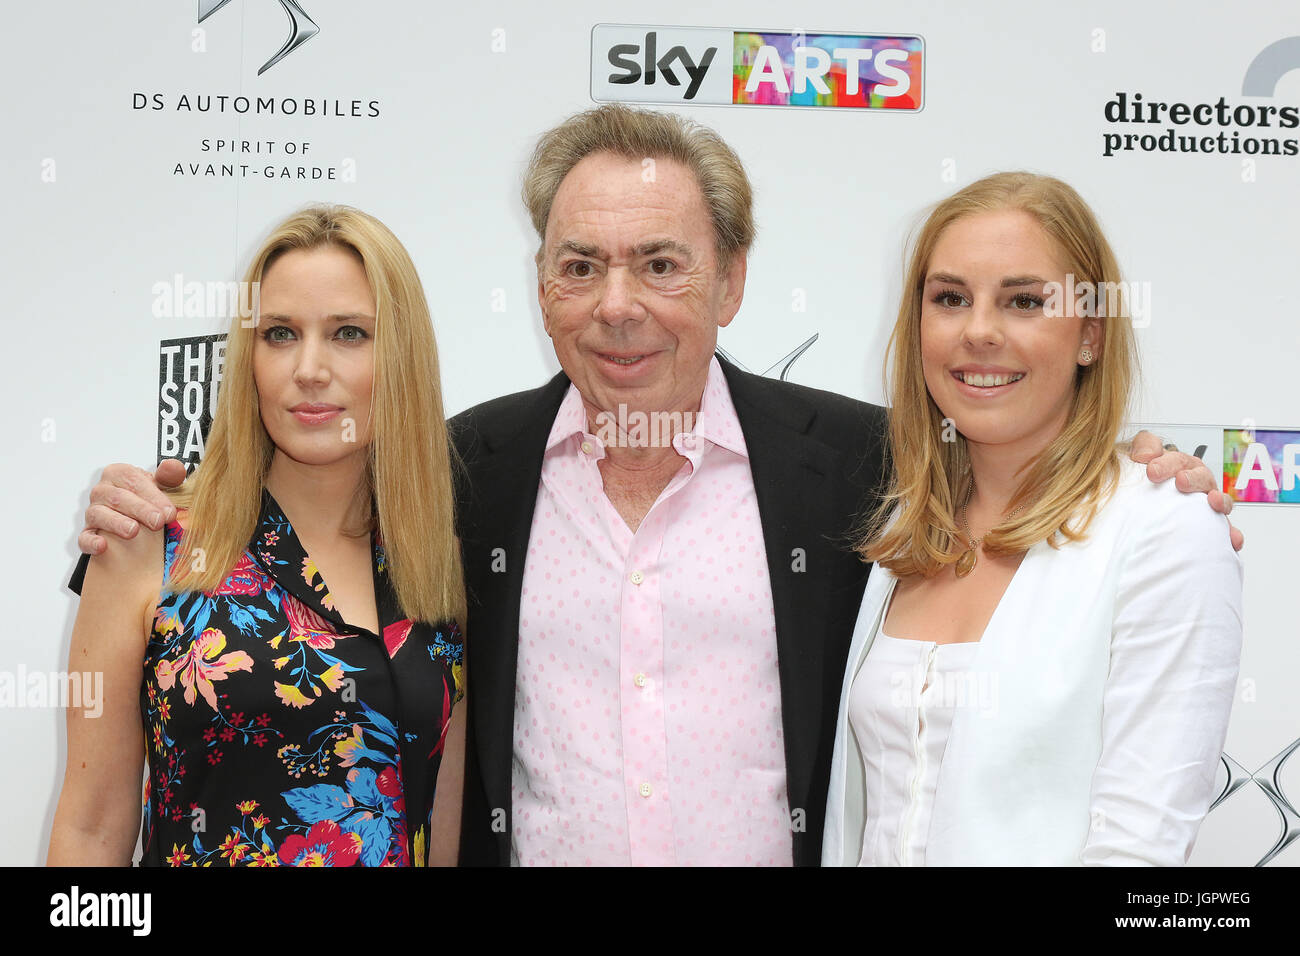 London, UK. 9th Jul, 2017. Andrew Lloyd Webber, daughters Imogen and Isabella, South Bank Sky Arts Awards, The Savoy, London, UK. 09th July, 2017. Photo by Richard Goldschmidt Credit: Rich Gold/Alamy Live News Stock Photo